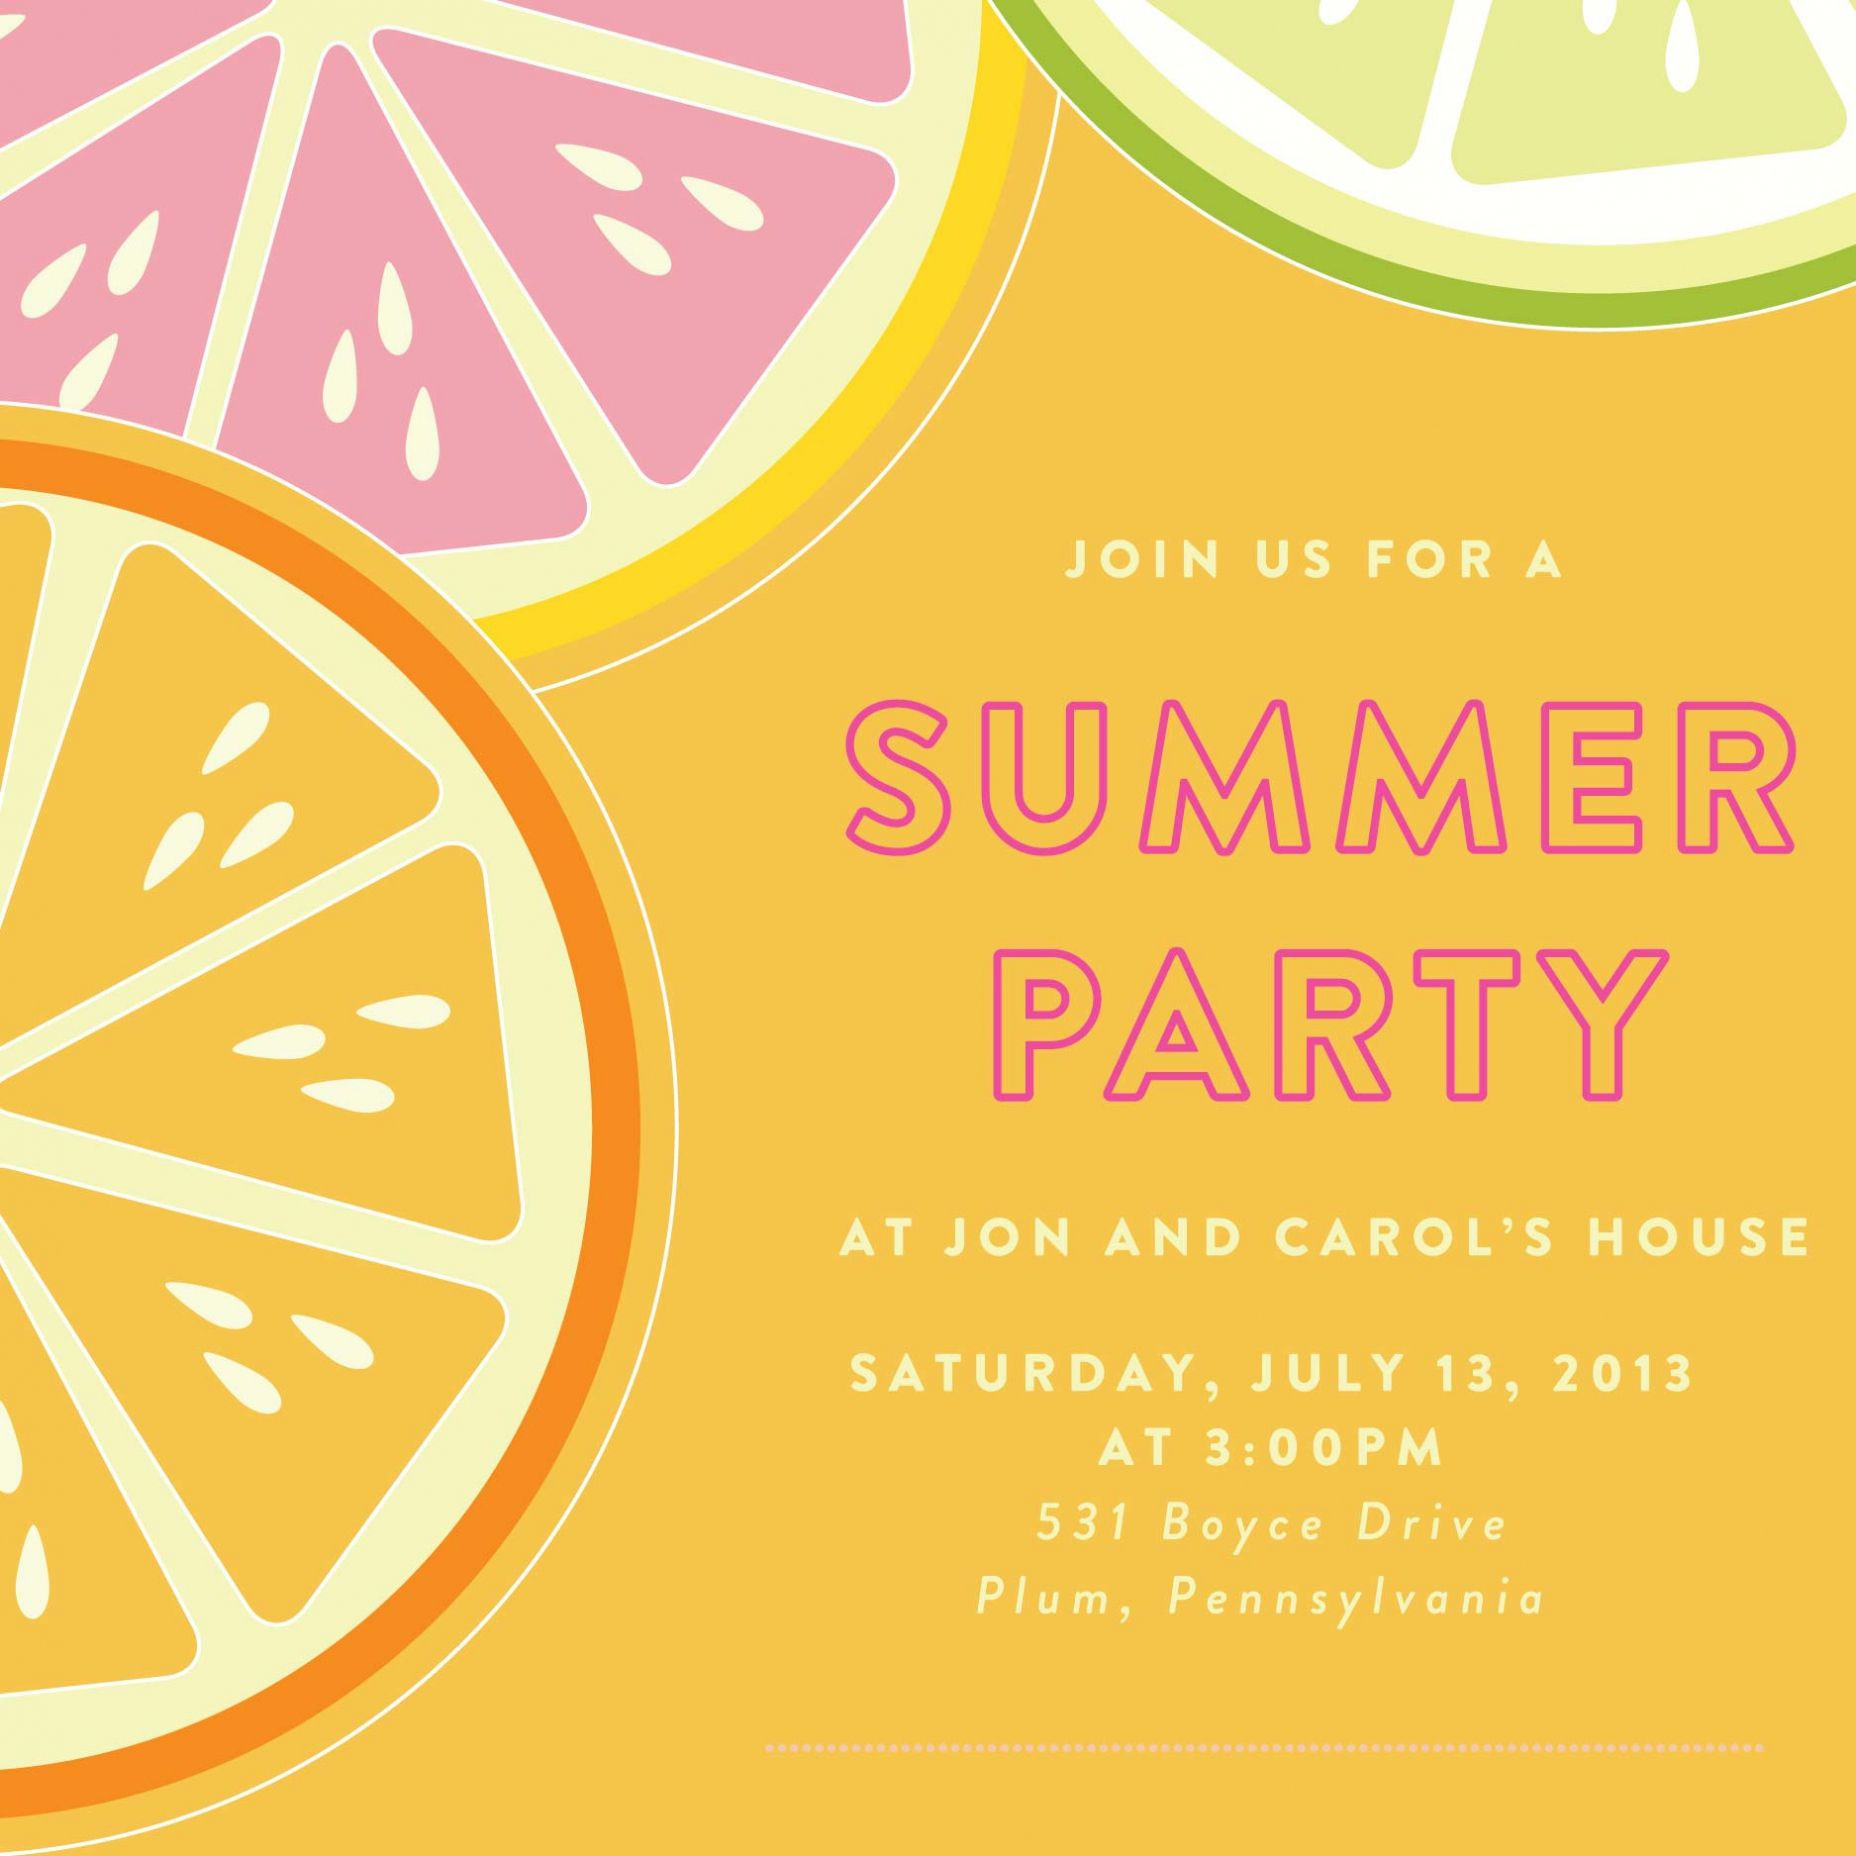 Summer Party Invitation Wording Ideas
 Summer Party Invitations to give you inspiration in making